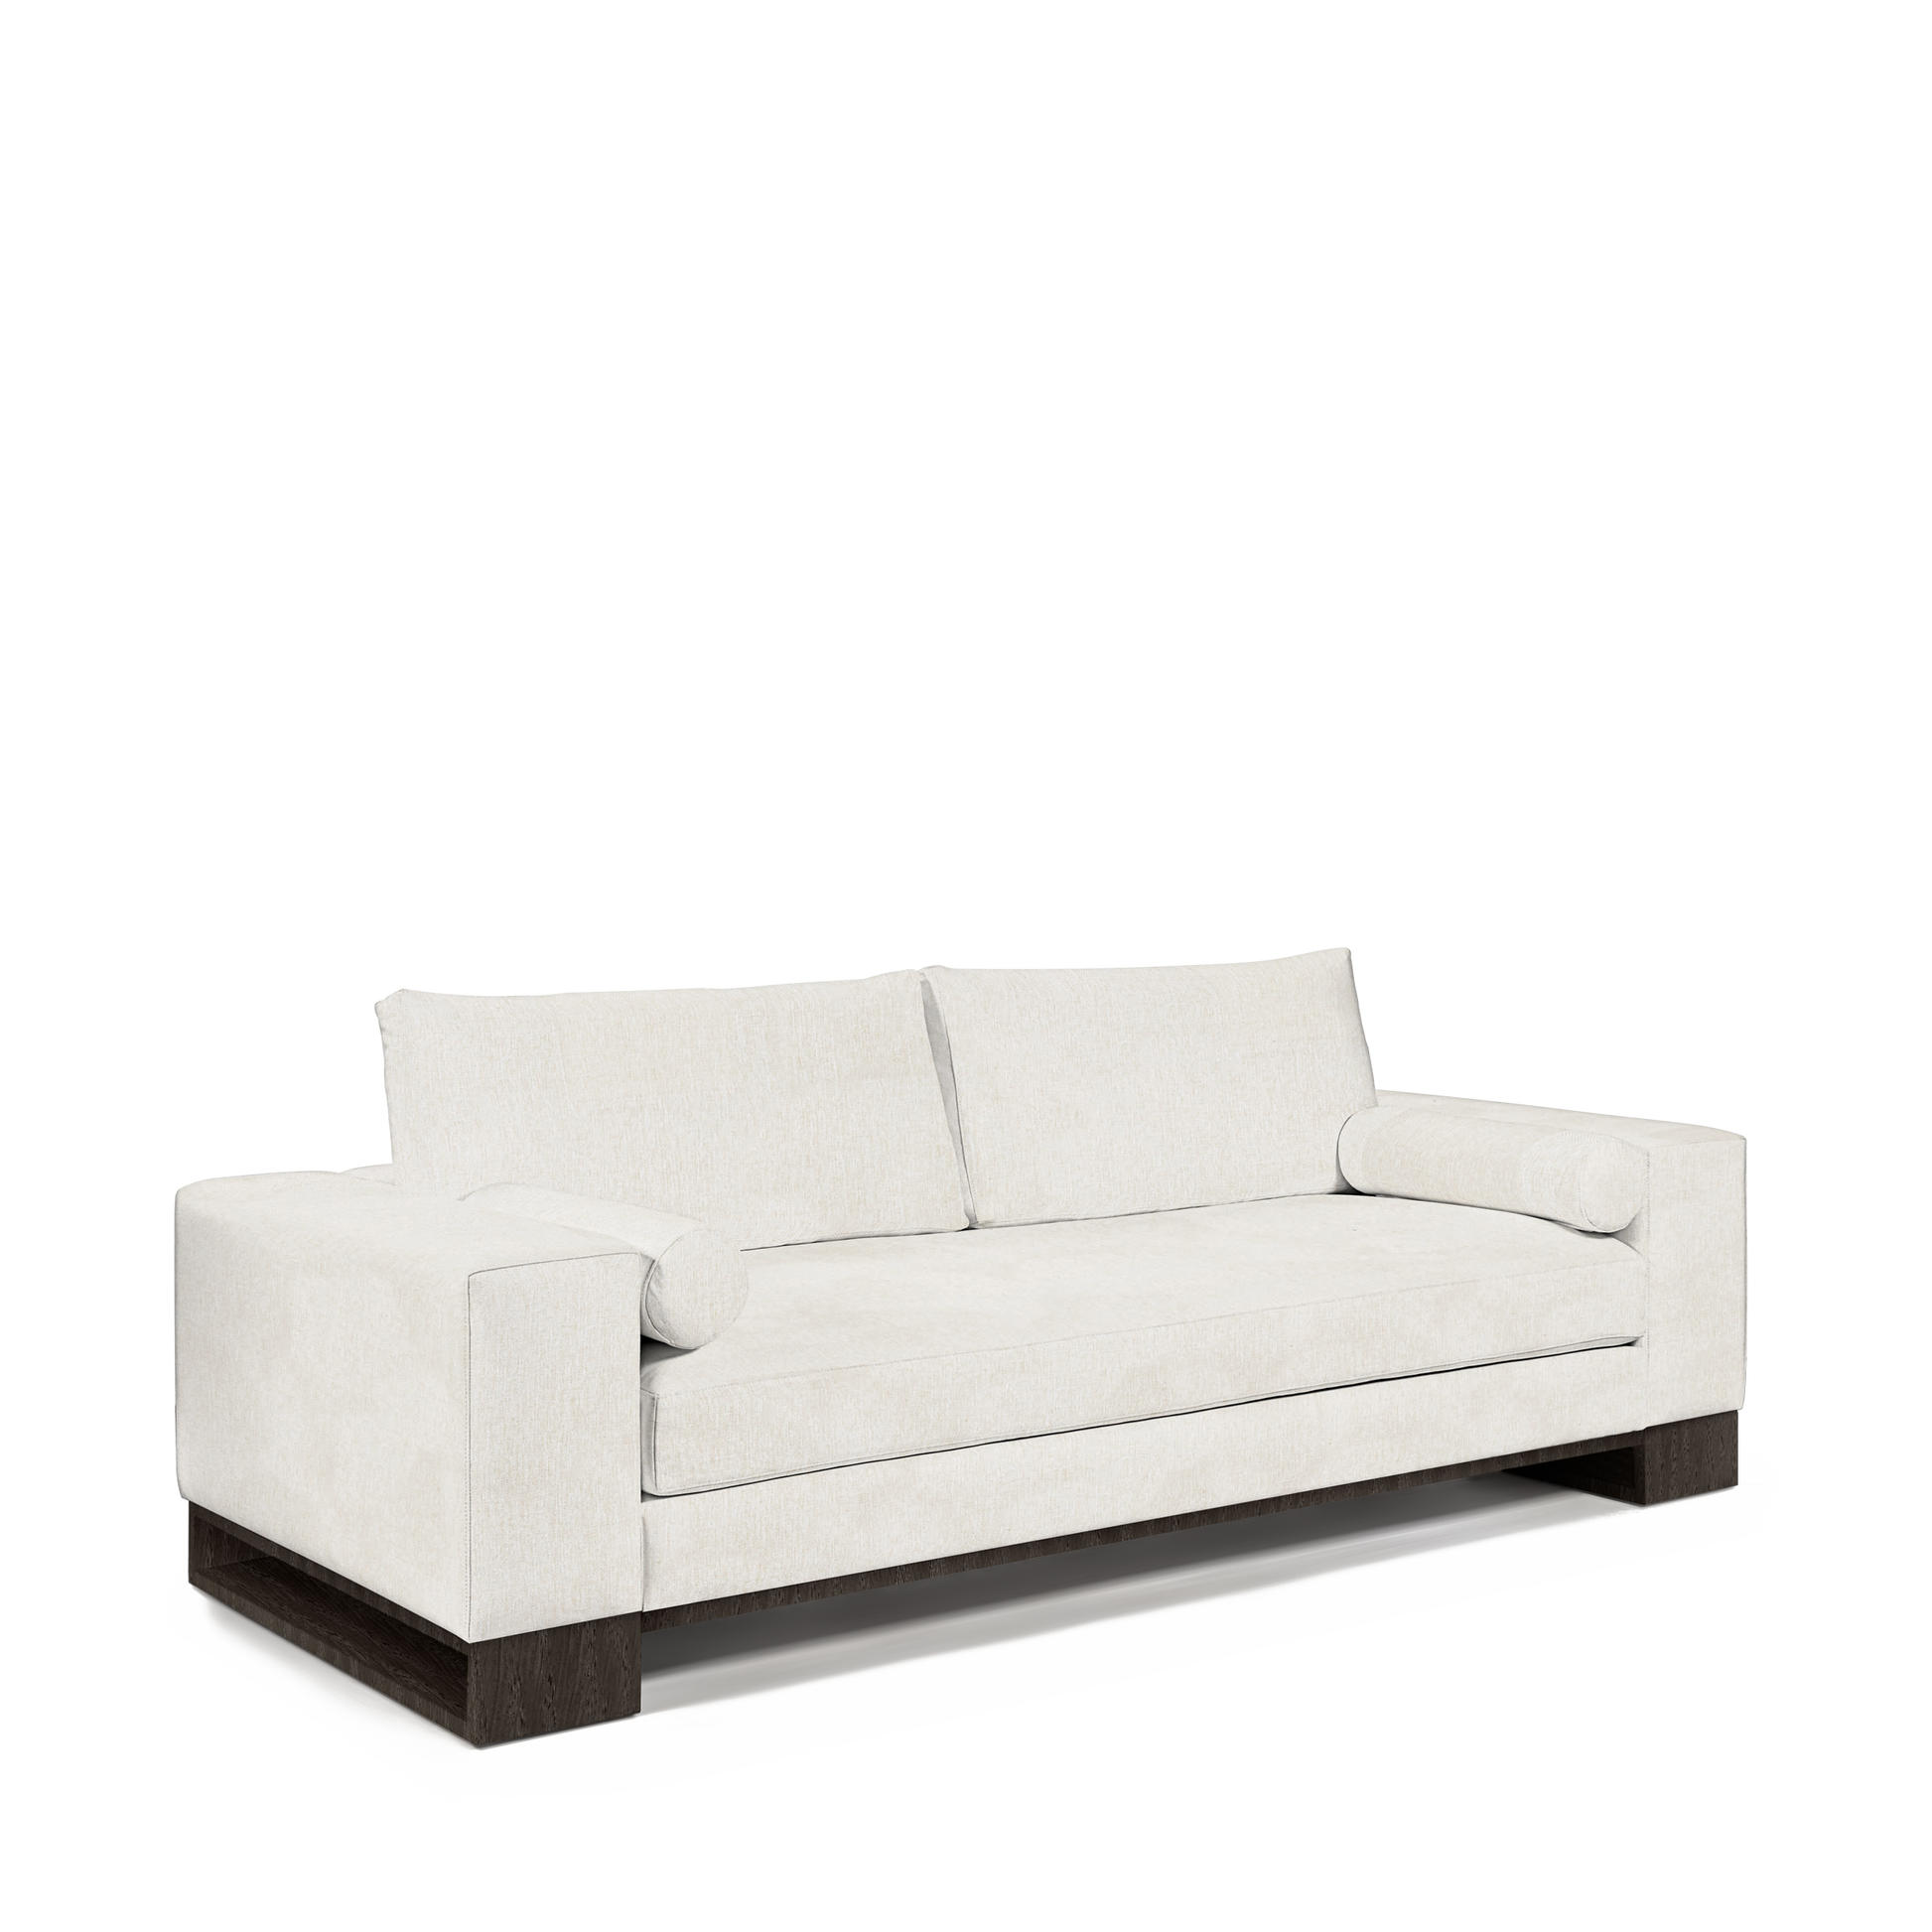 TERRA 2,5-seater sofa with bolt white textile and dark grey wood legs 